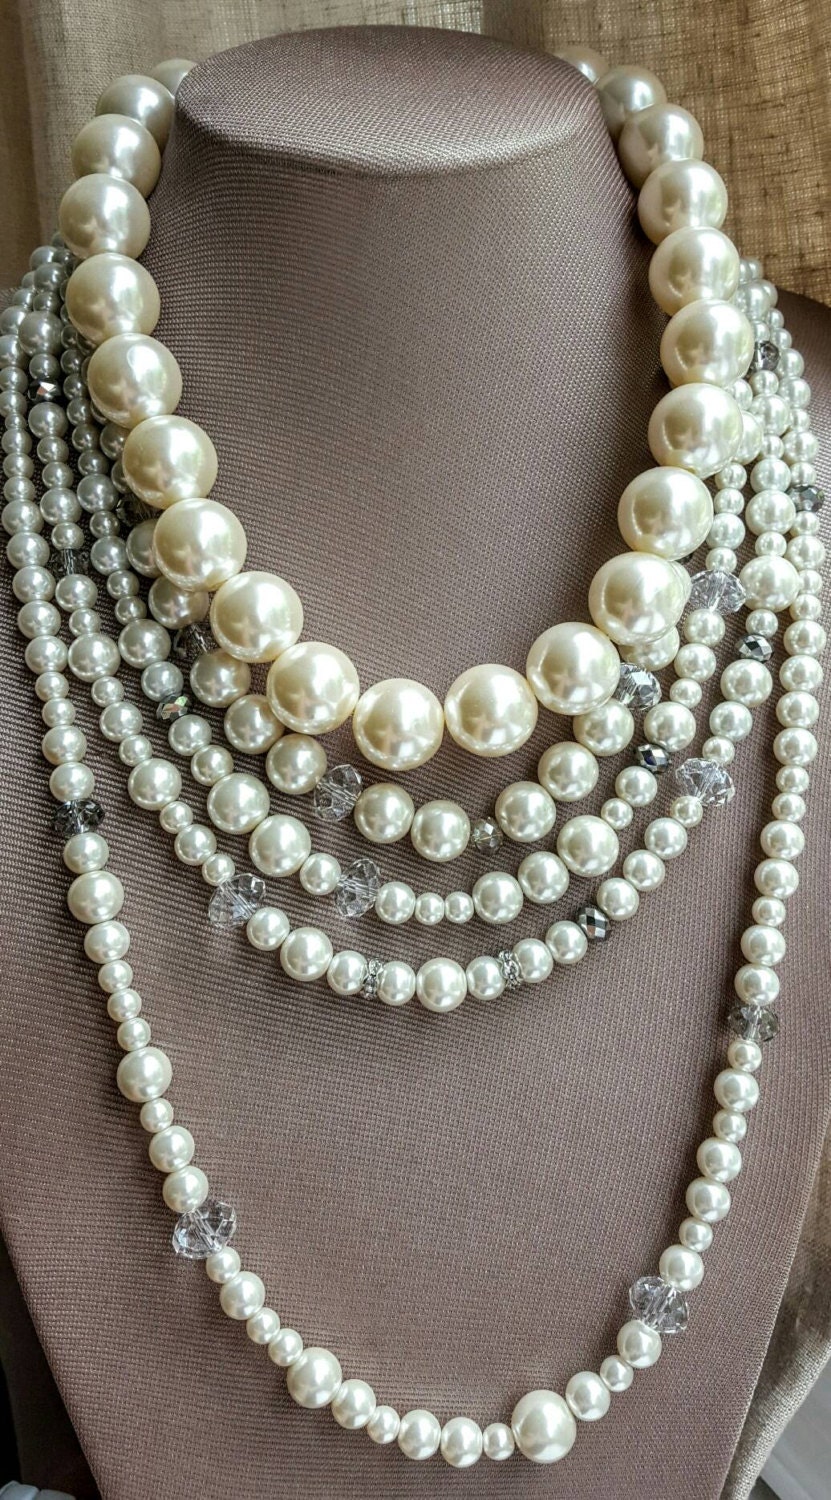 Multilayer gray mother of pearl and glass pearl necklace